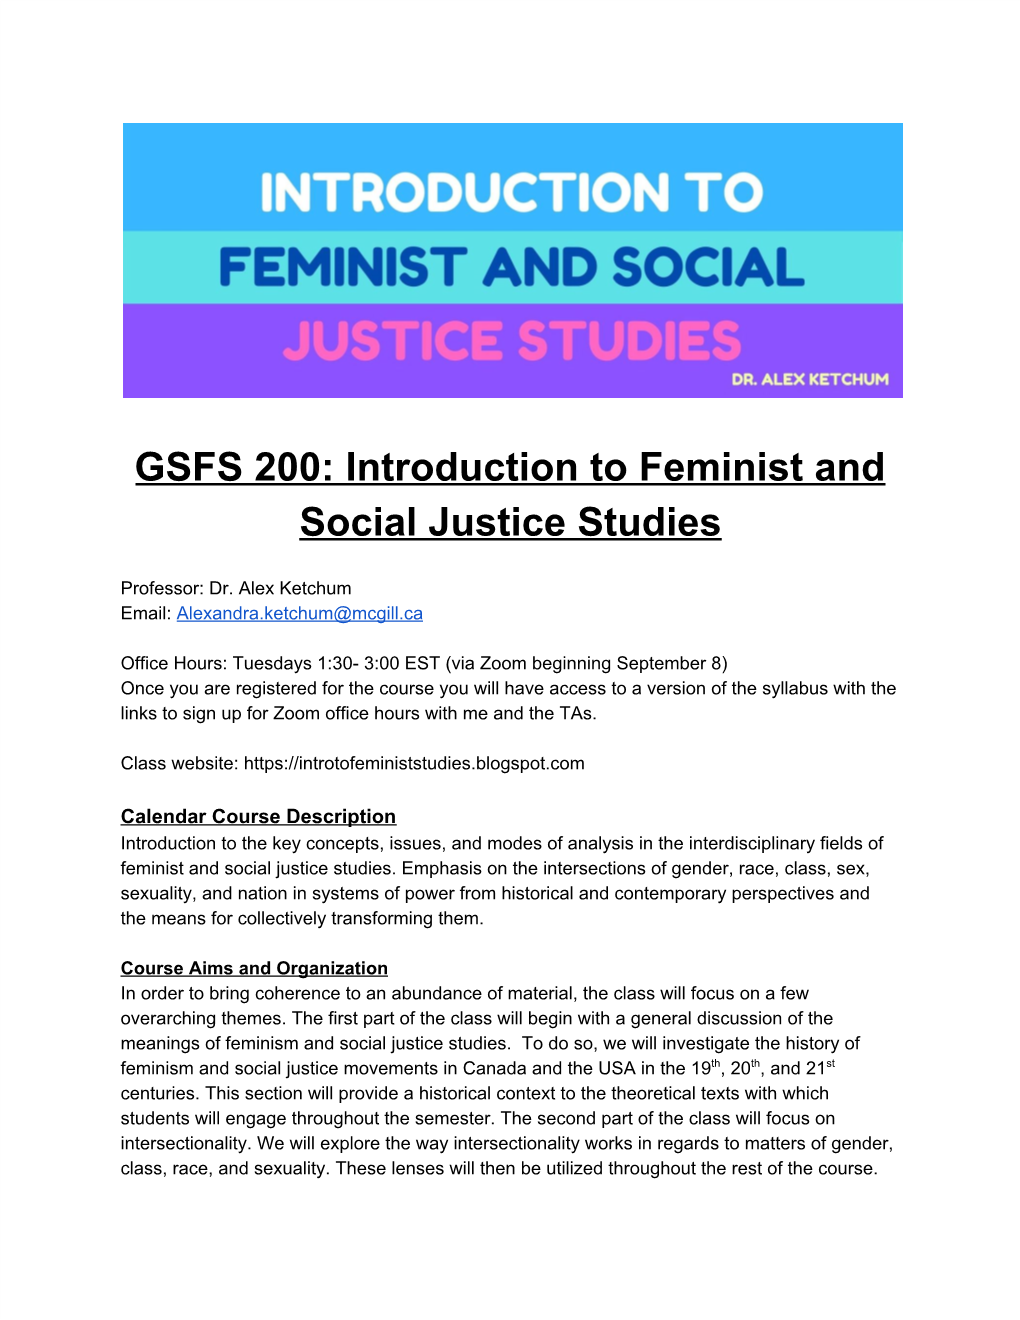 GSFS 200: Introduction to Feminist and Social Justice Studies